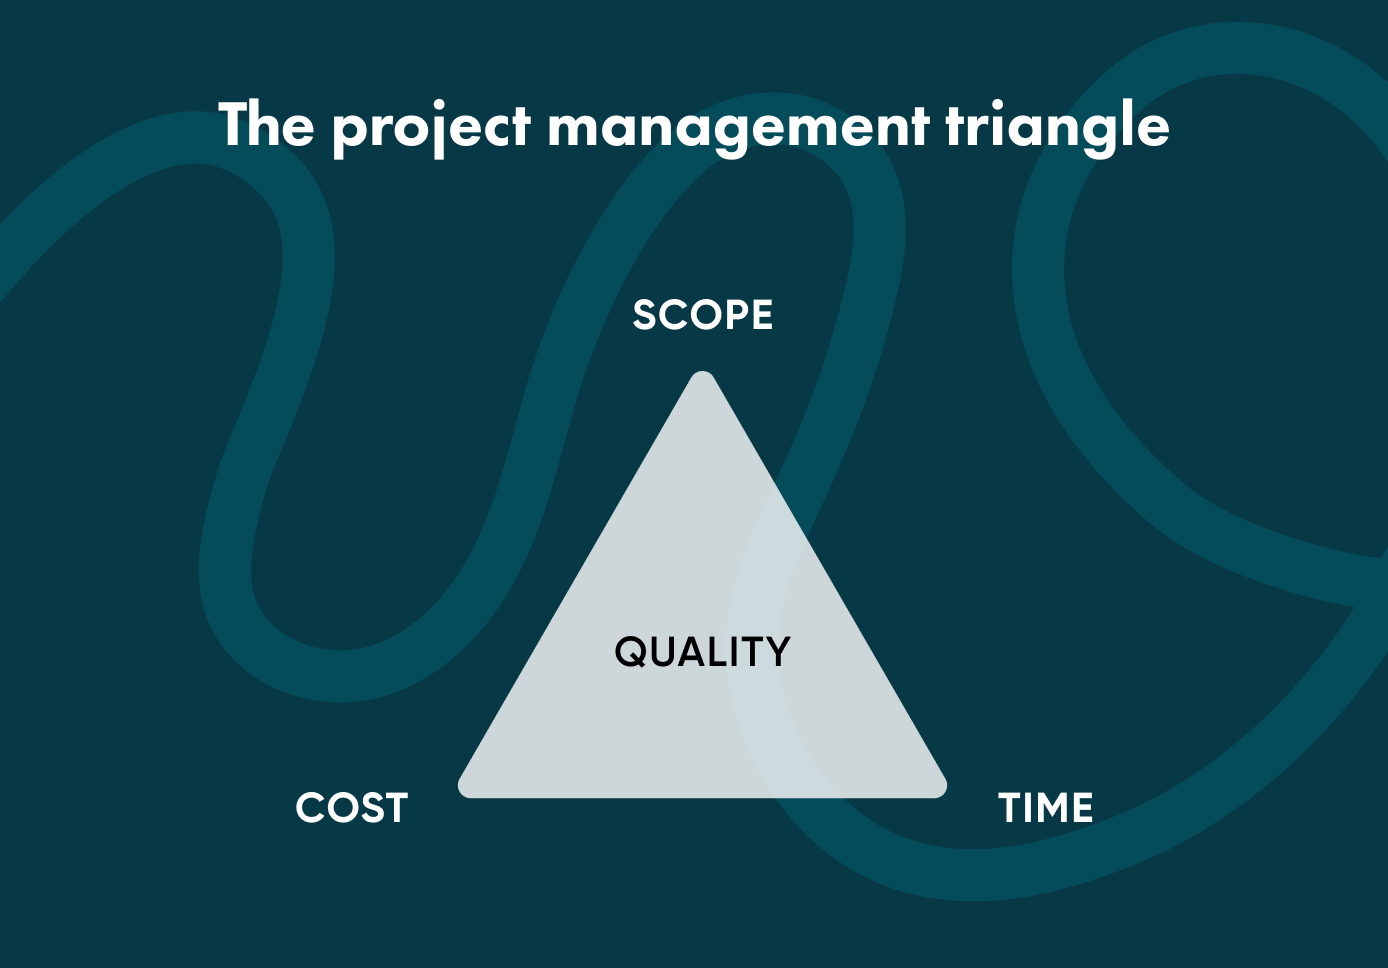 The quality of any project is constrained by 3 things. They are cost, time, and scope.